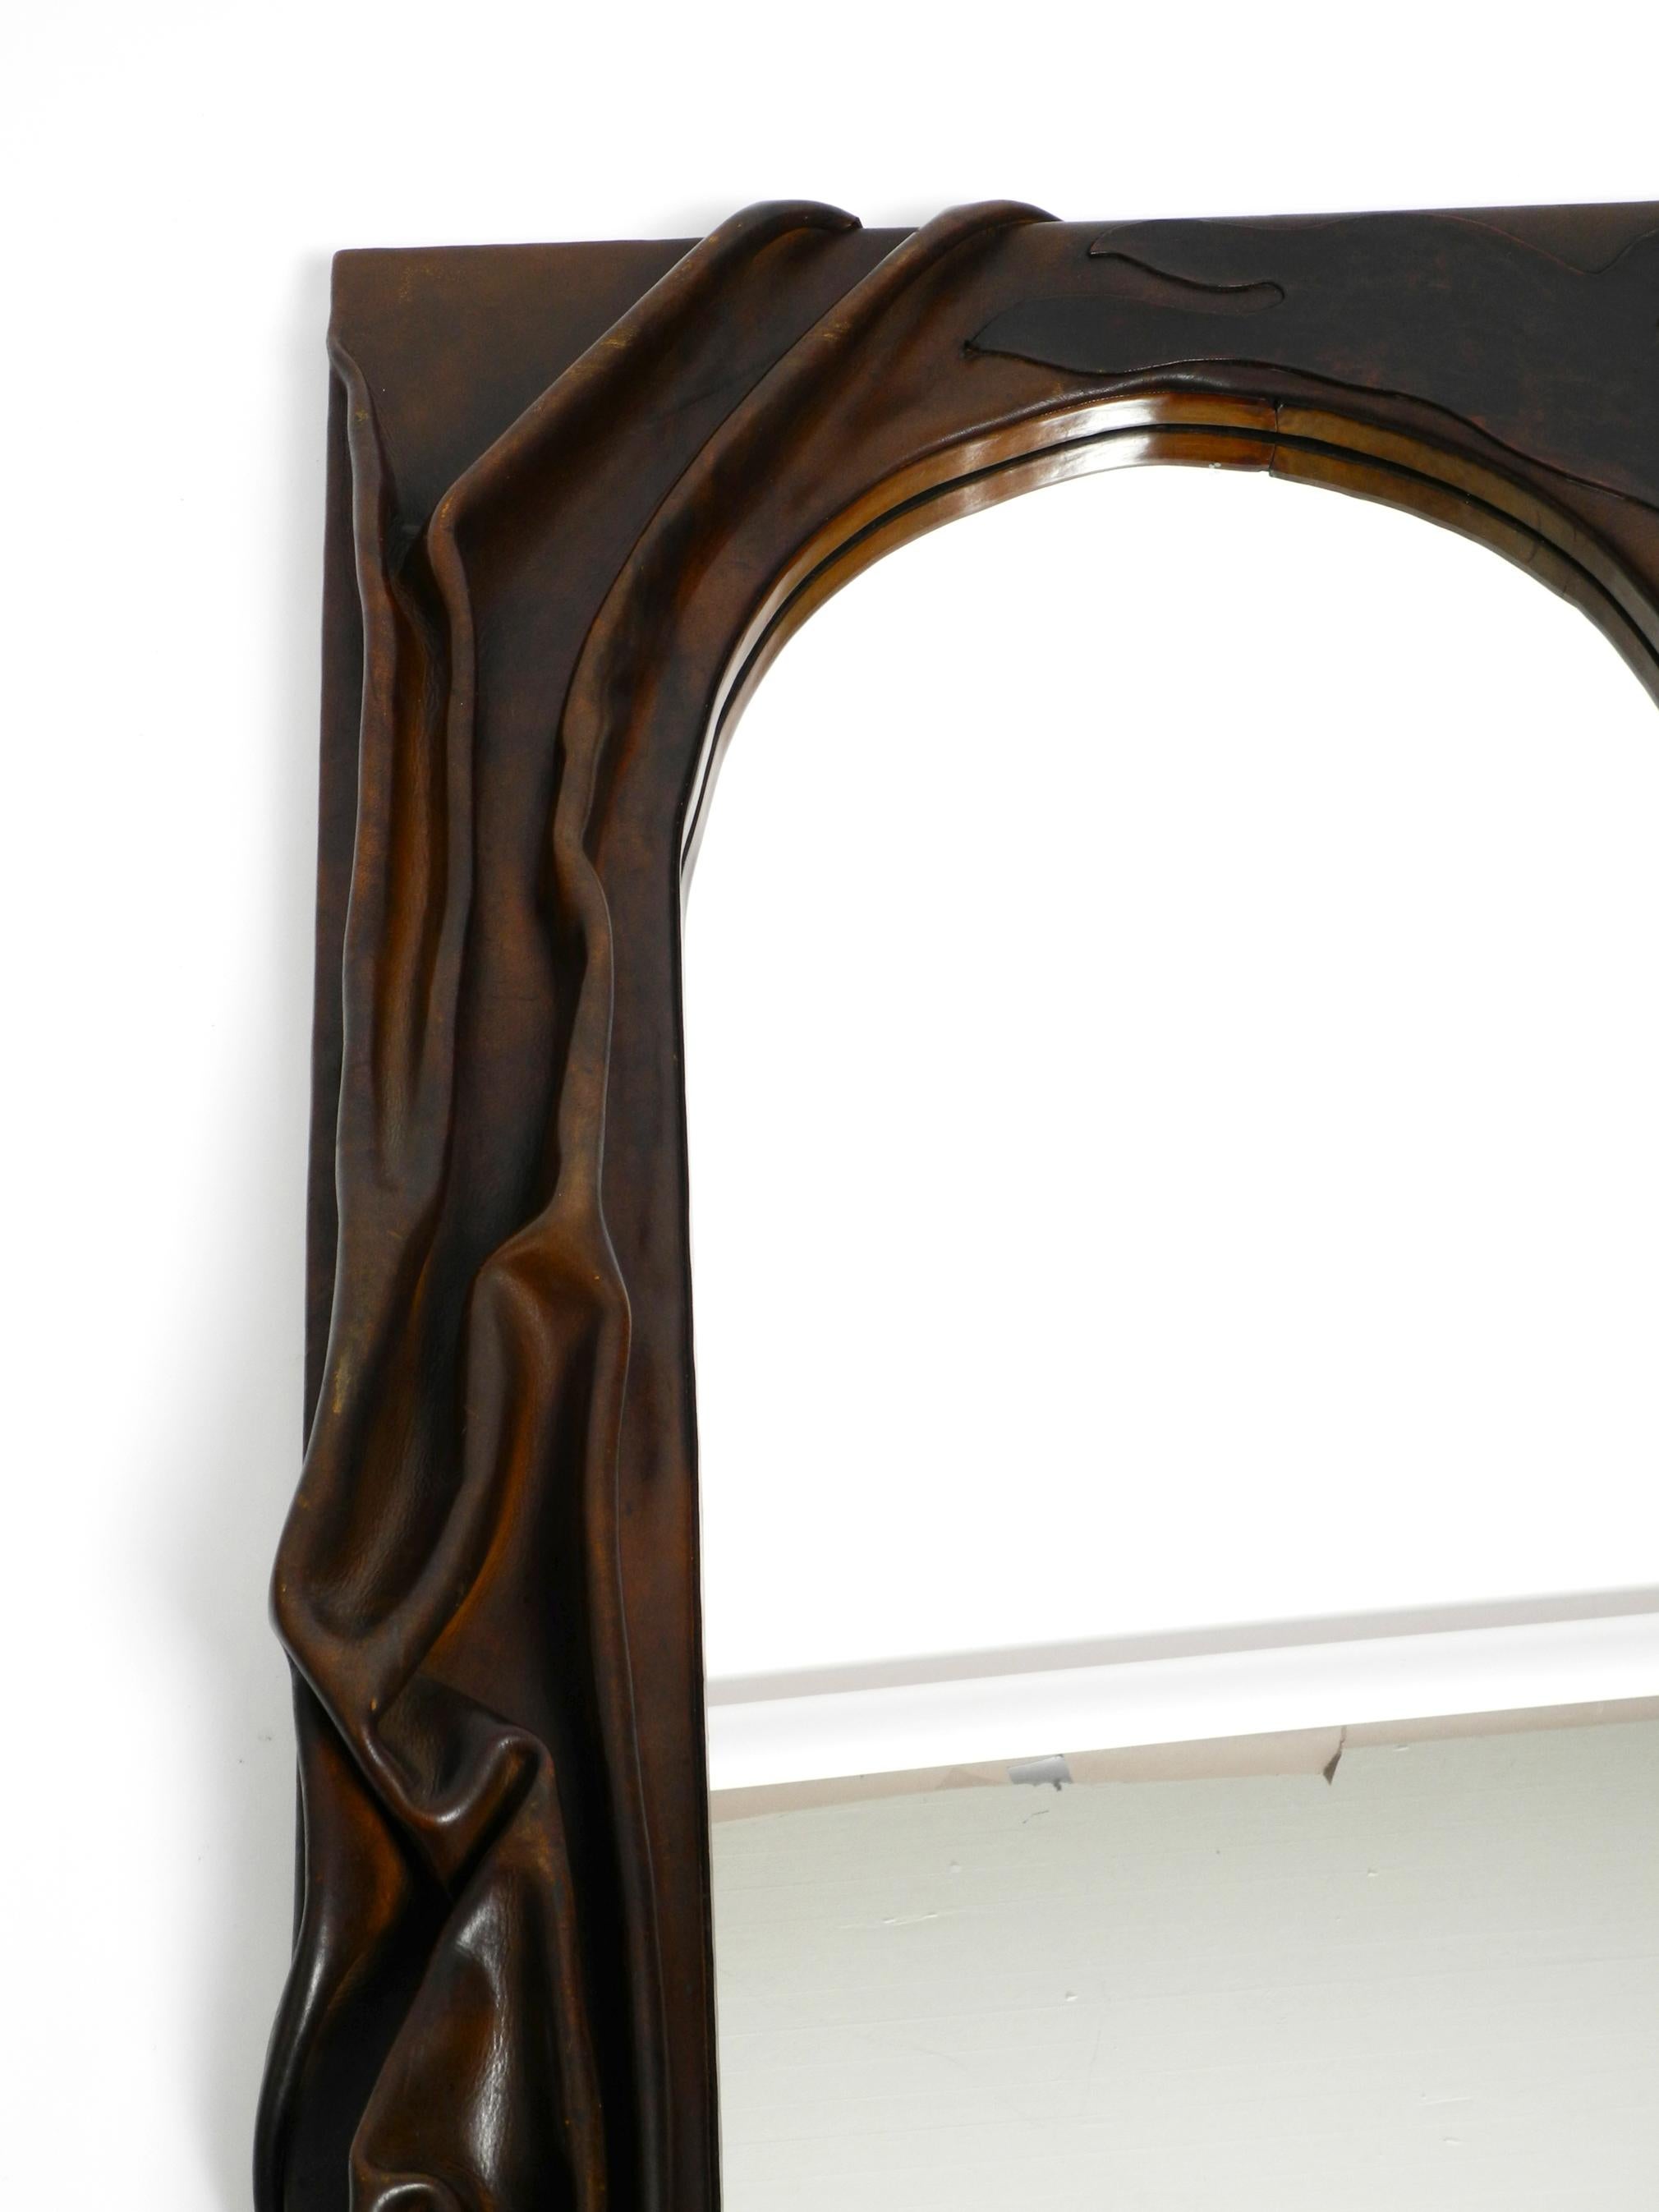 70s large wooden wall mirror with an elaborate and thick flowing leather cover  For Sale 5